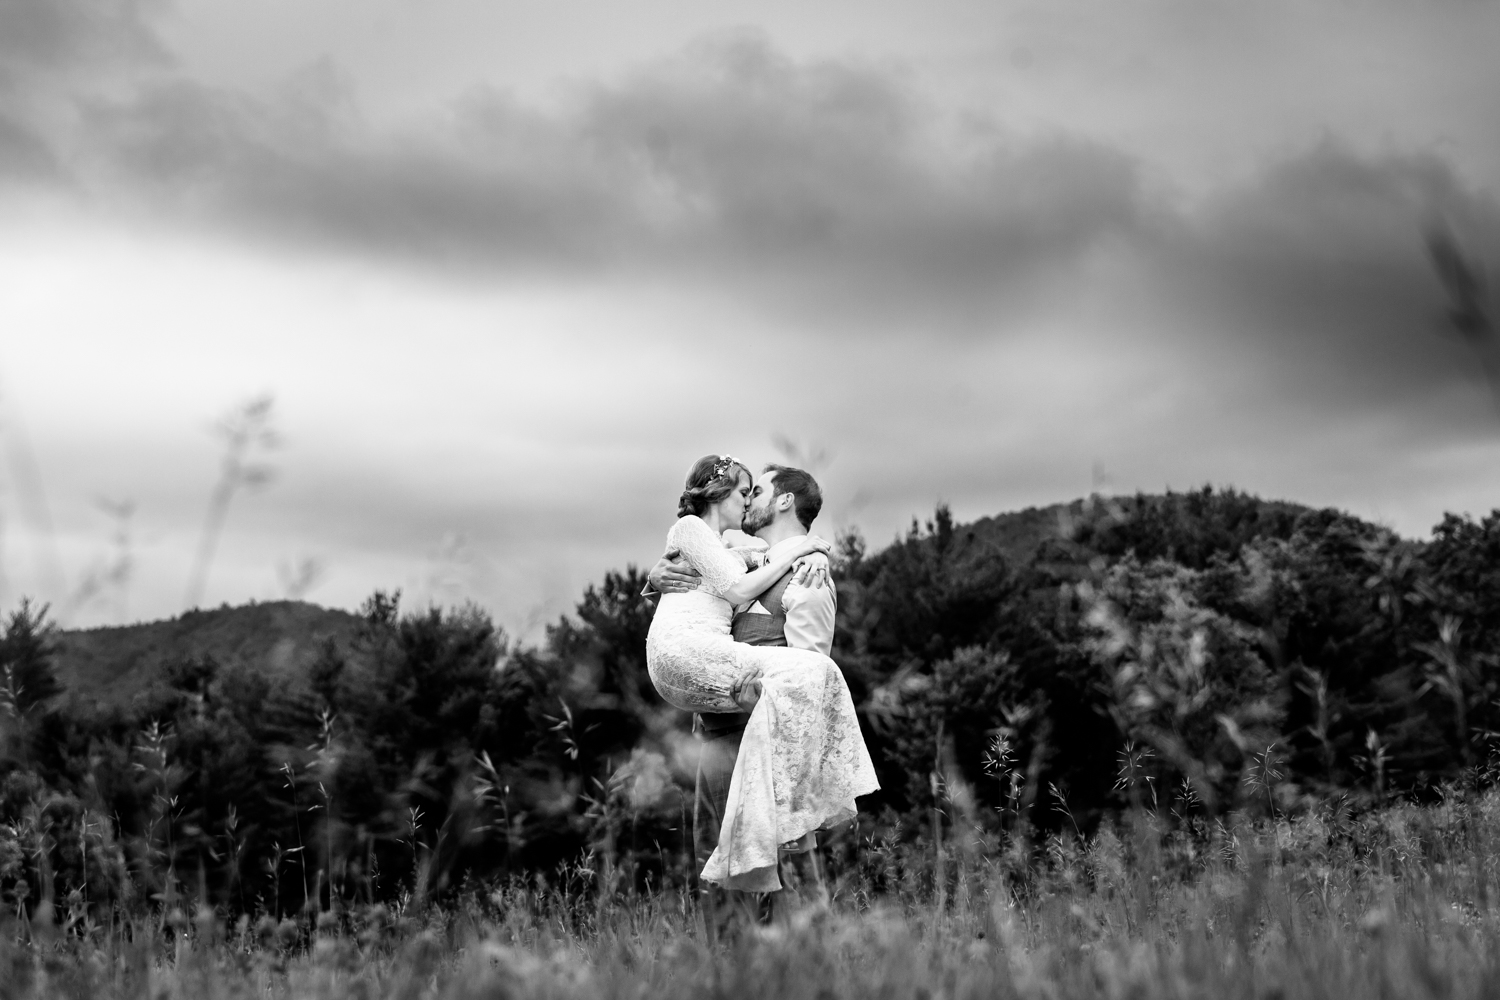  A groom carries a bride in a field 